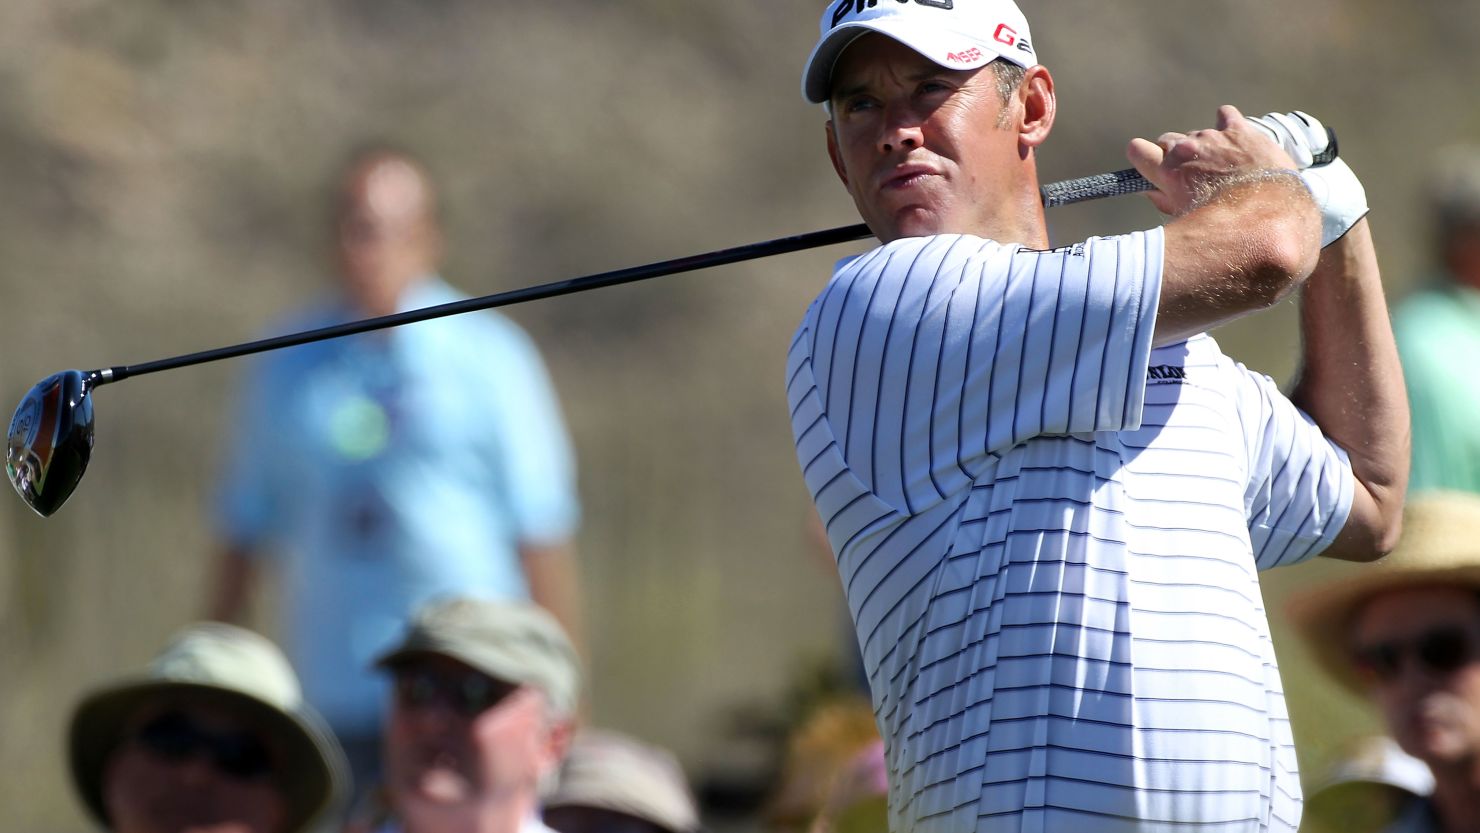 Lee Westwood continued his impressive form in Arizona with a 3&2 win over Nick Watney.